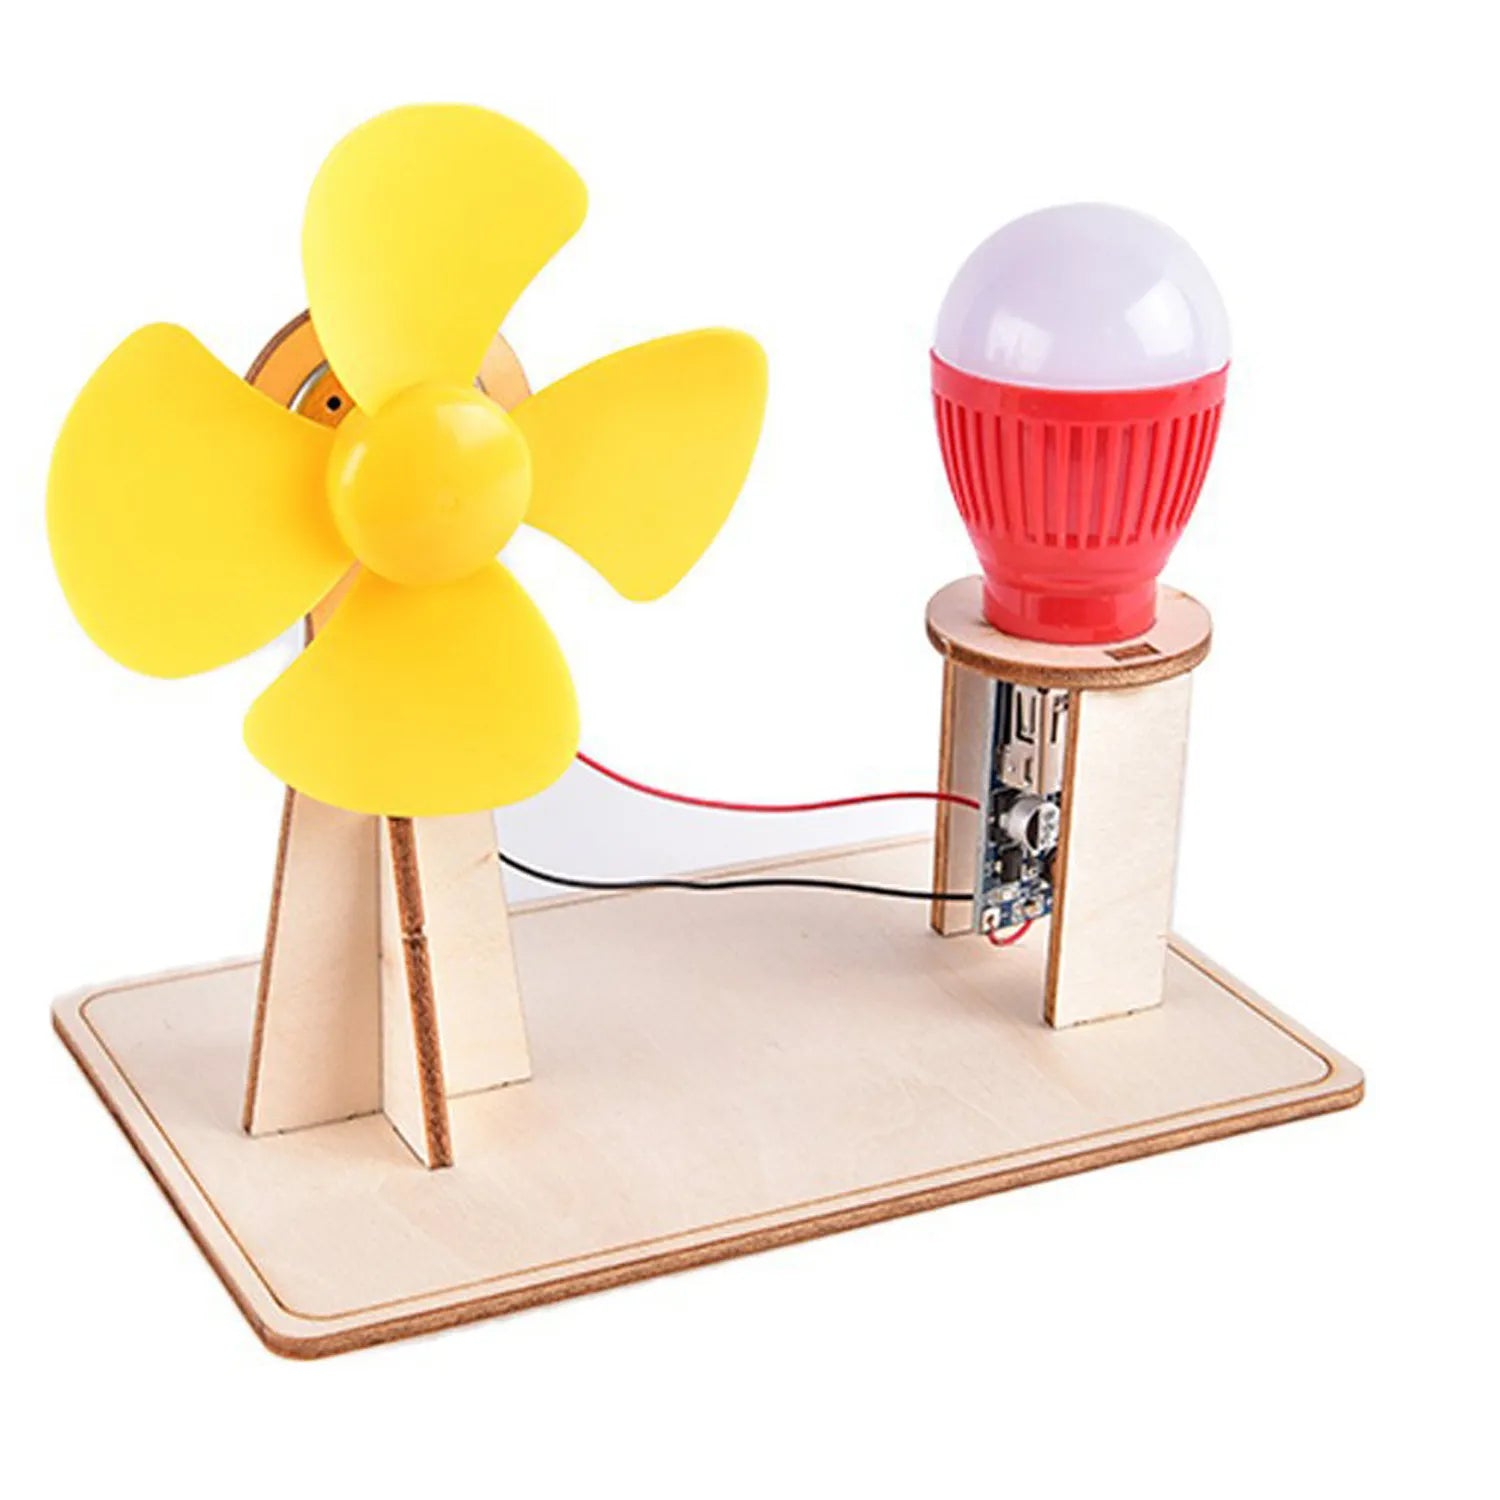 Wooden Wind Generator Model Kids Science Toy Funny Technology Physics Kit Educational Toys for Children Learning Toy Little Artist Drawing Hub